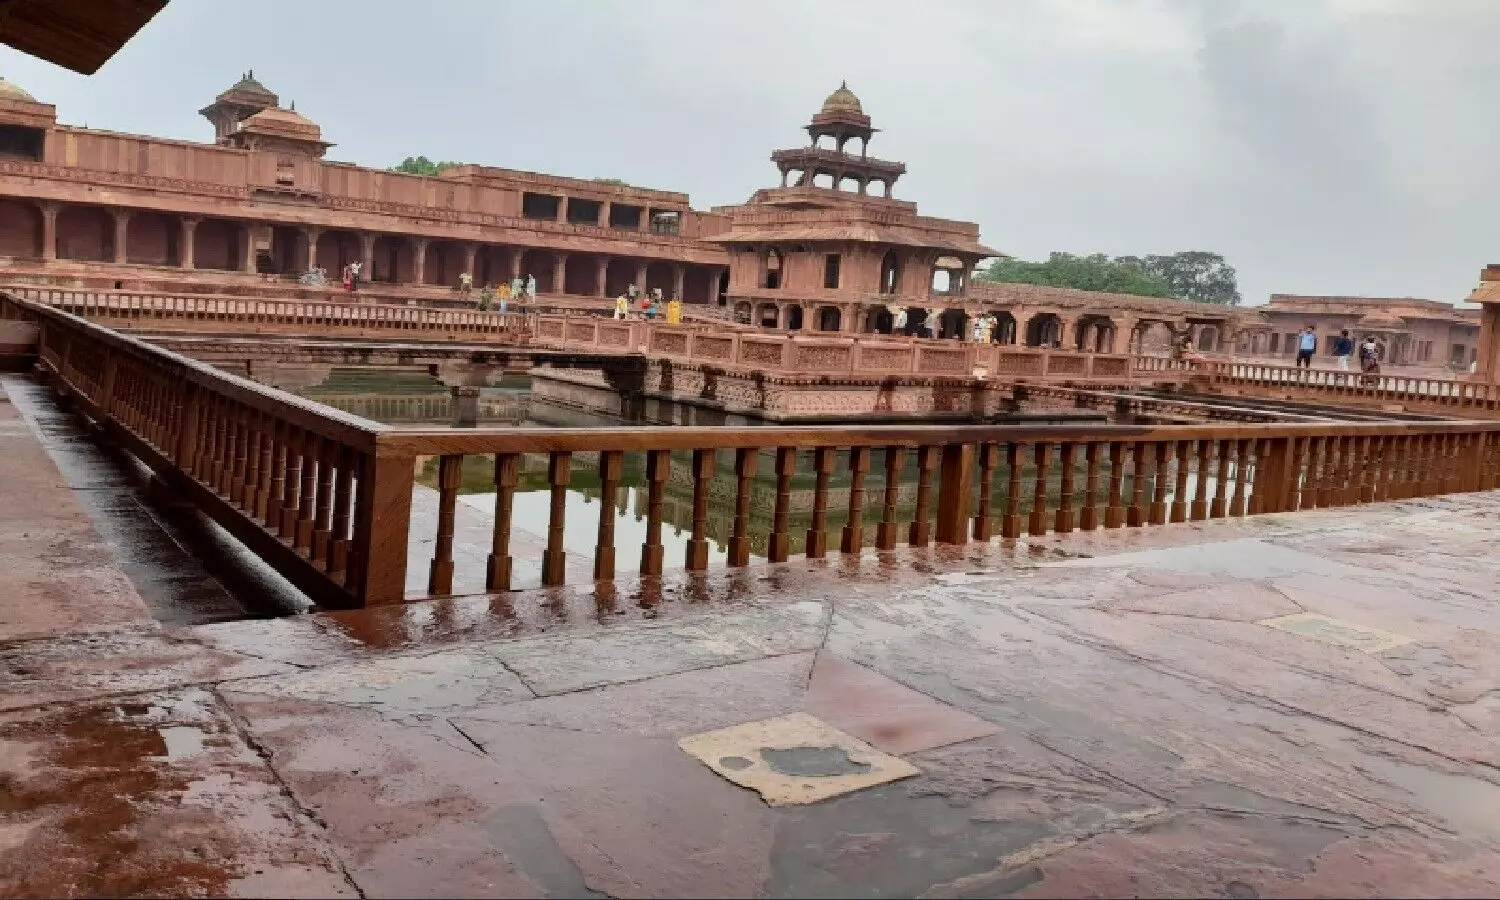 The historic building of Agra, Fatehpur Sikri and Buland Darwaza will be protected by tuffed glass.